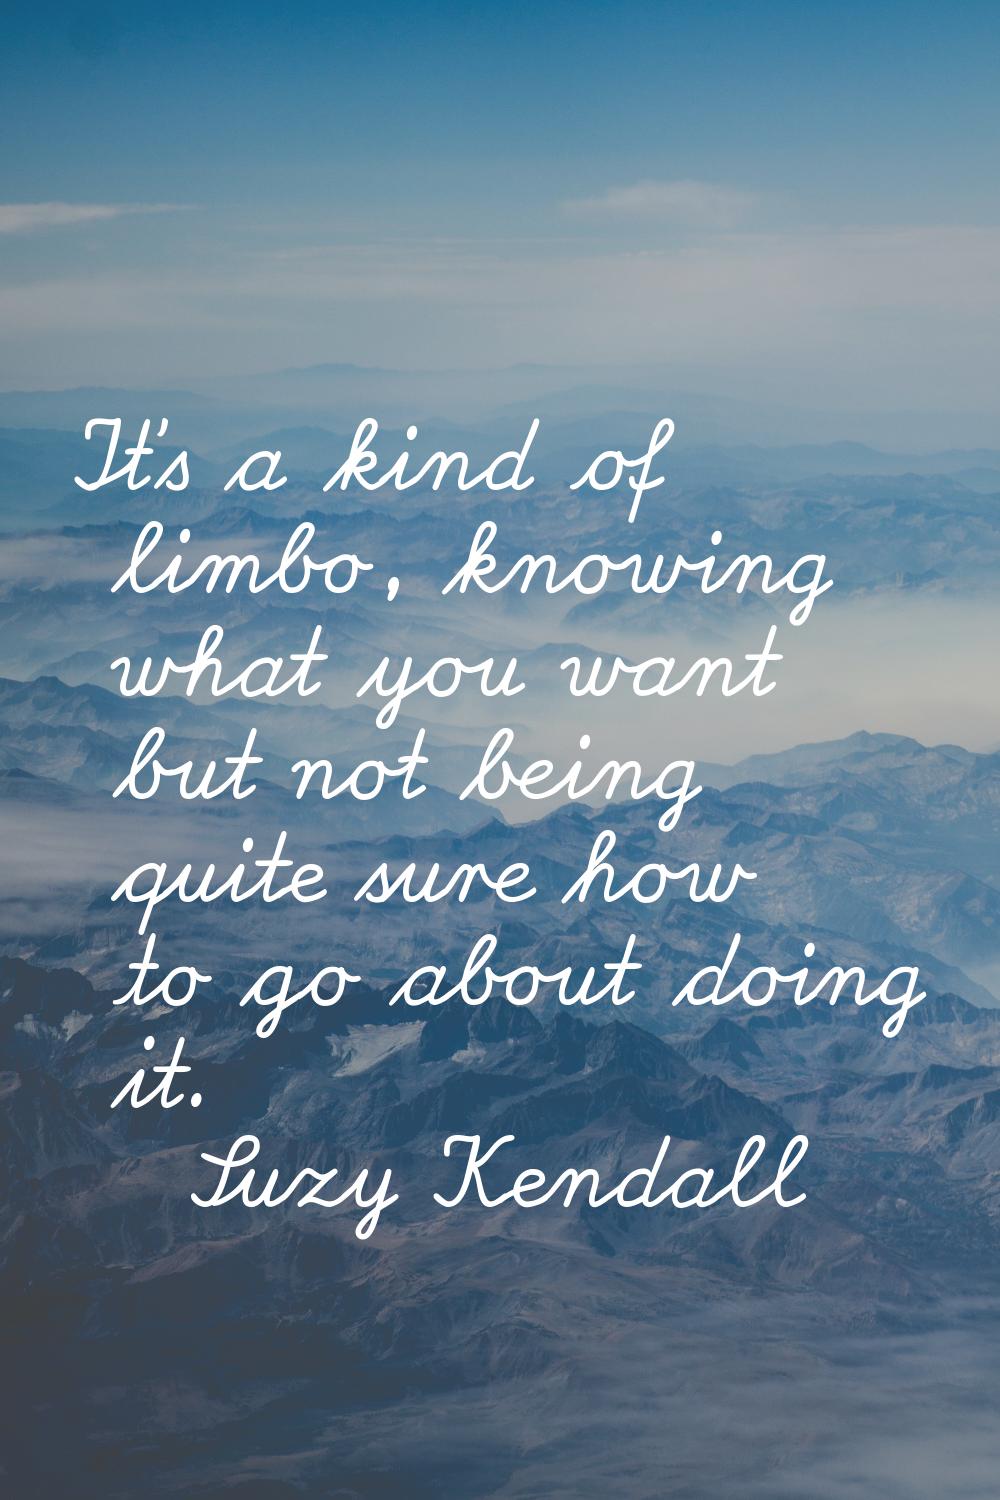 It's a kind of limbo, knowing what you want but not being quite sure how to go about doing it.